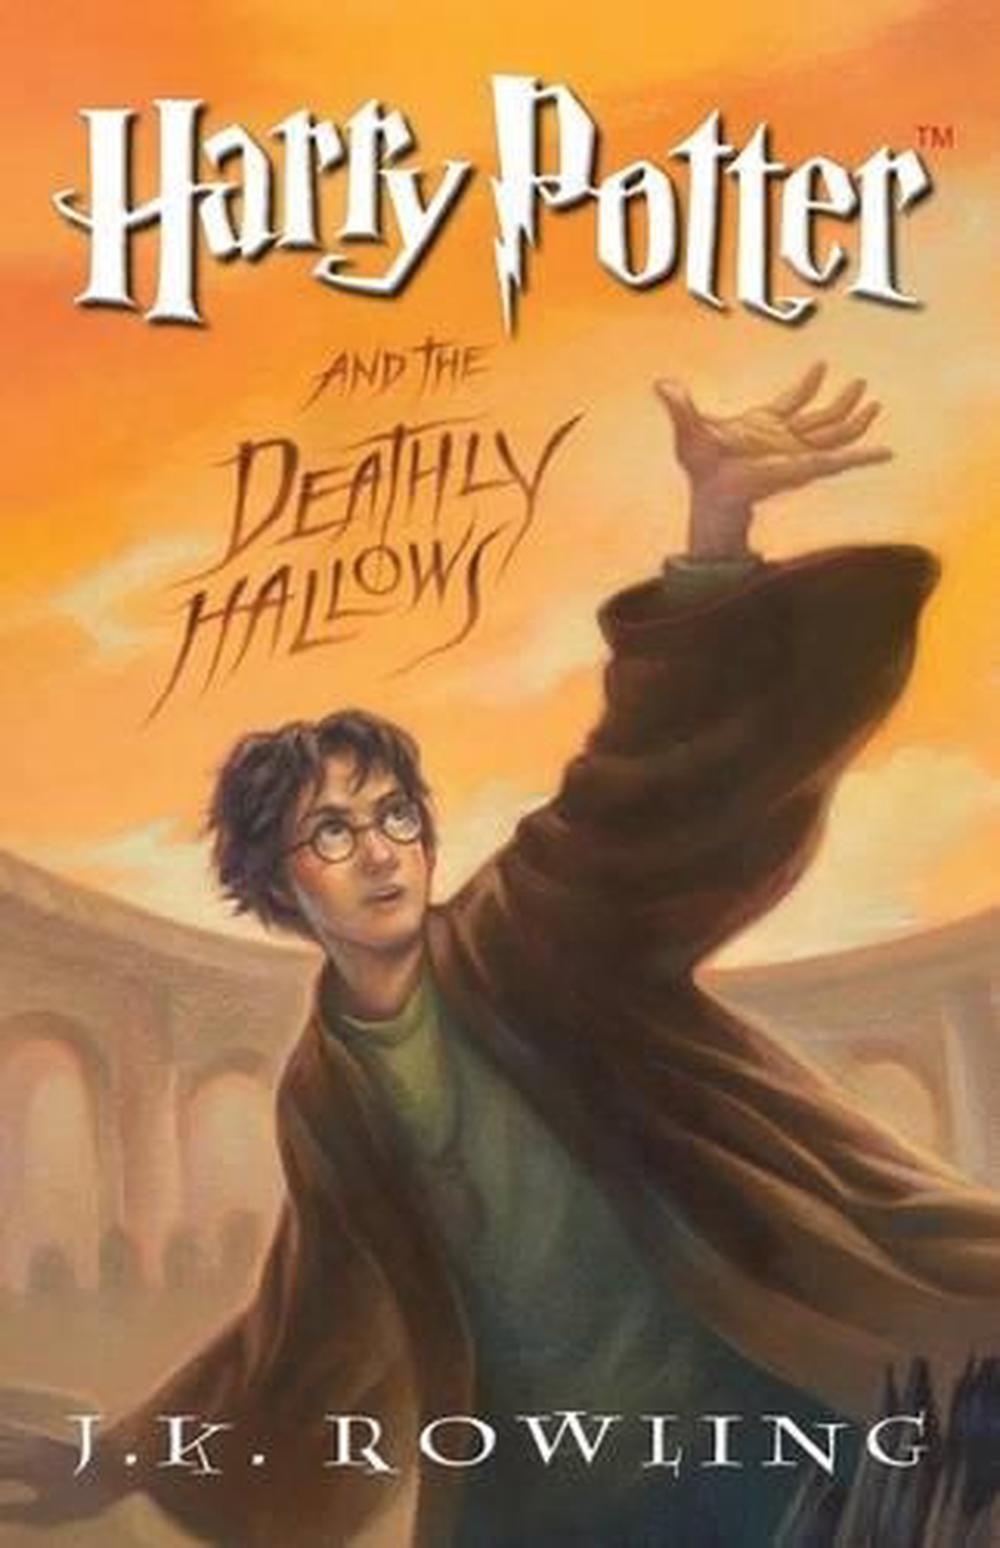 harry potter and the deathly hallows audiobook free streaming